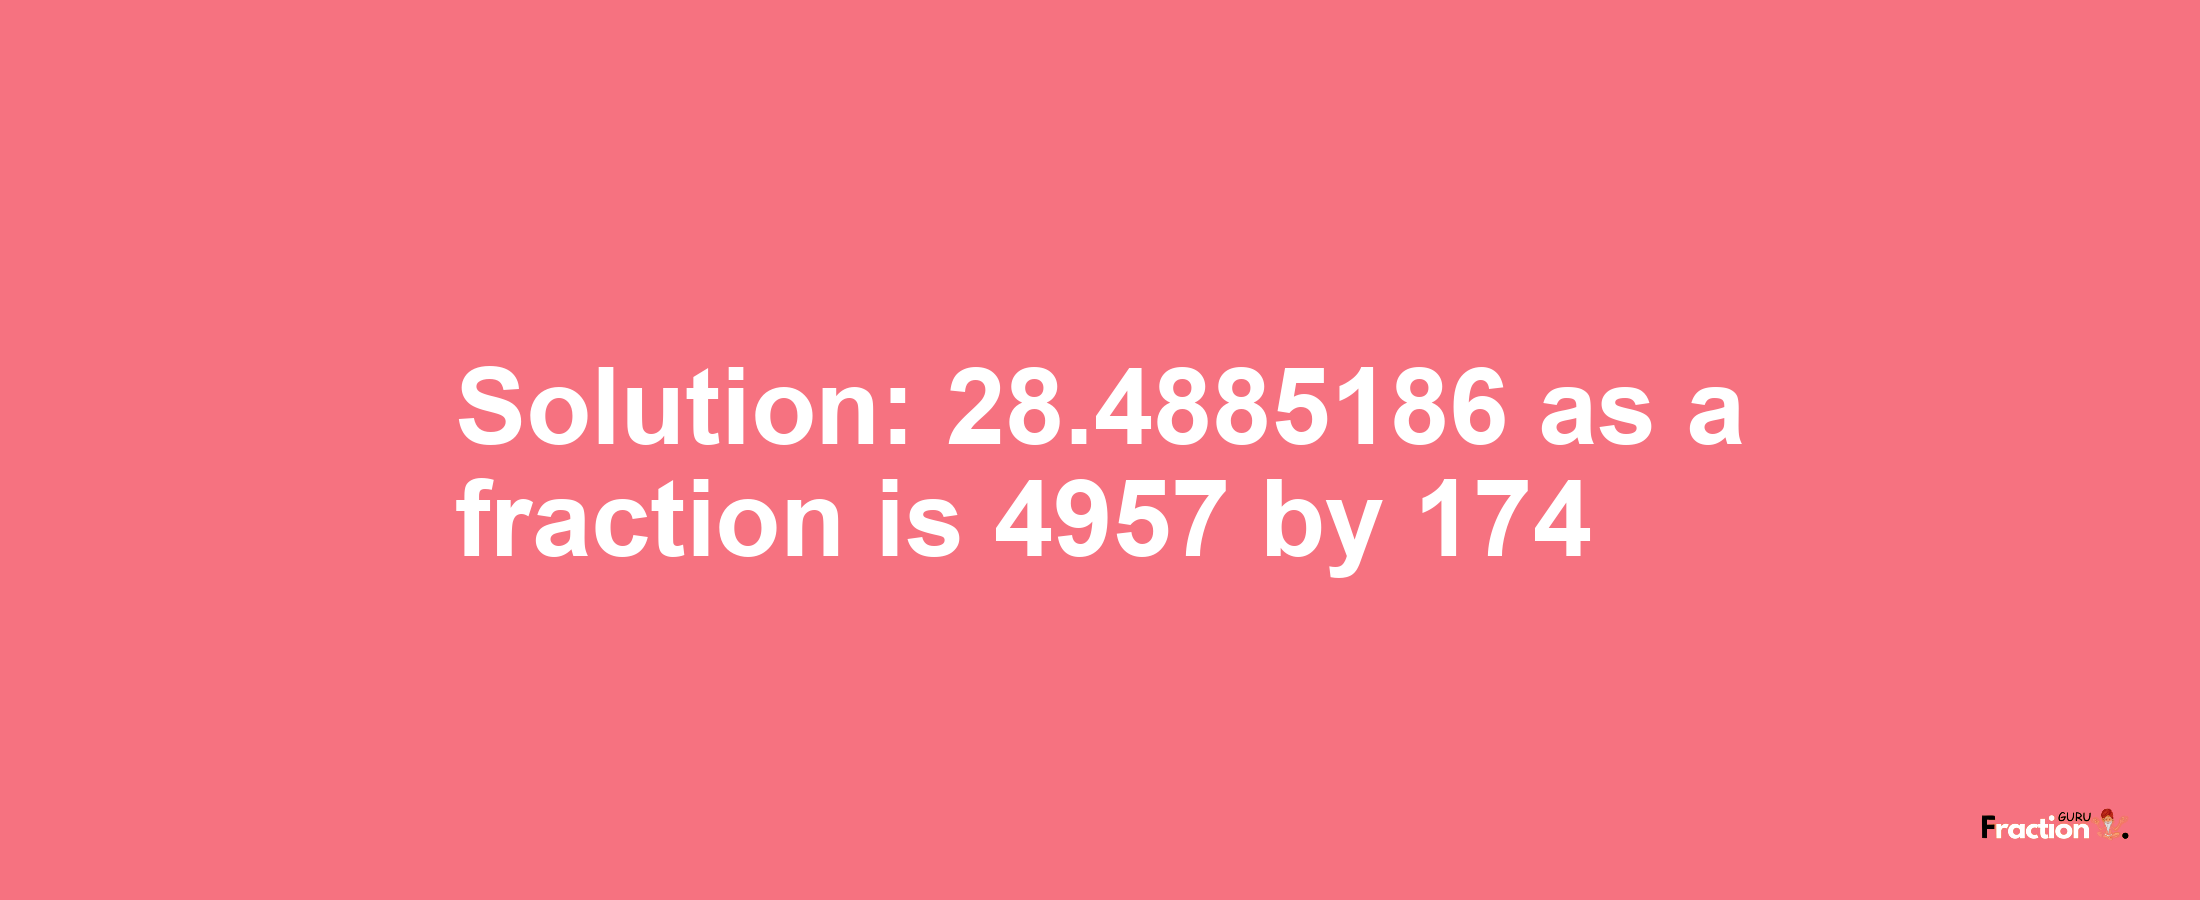 Solution:28.4885186 as a fraction is 4957/174